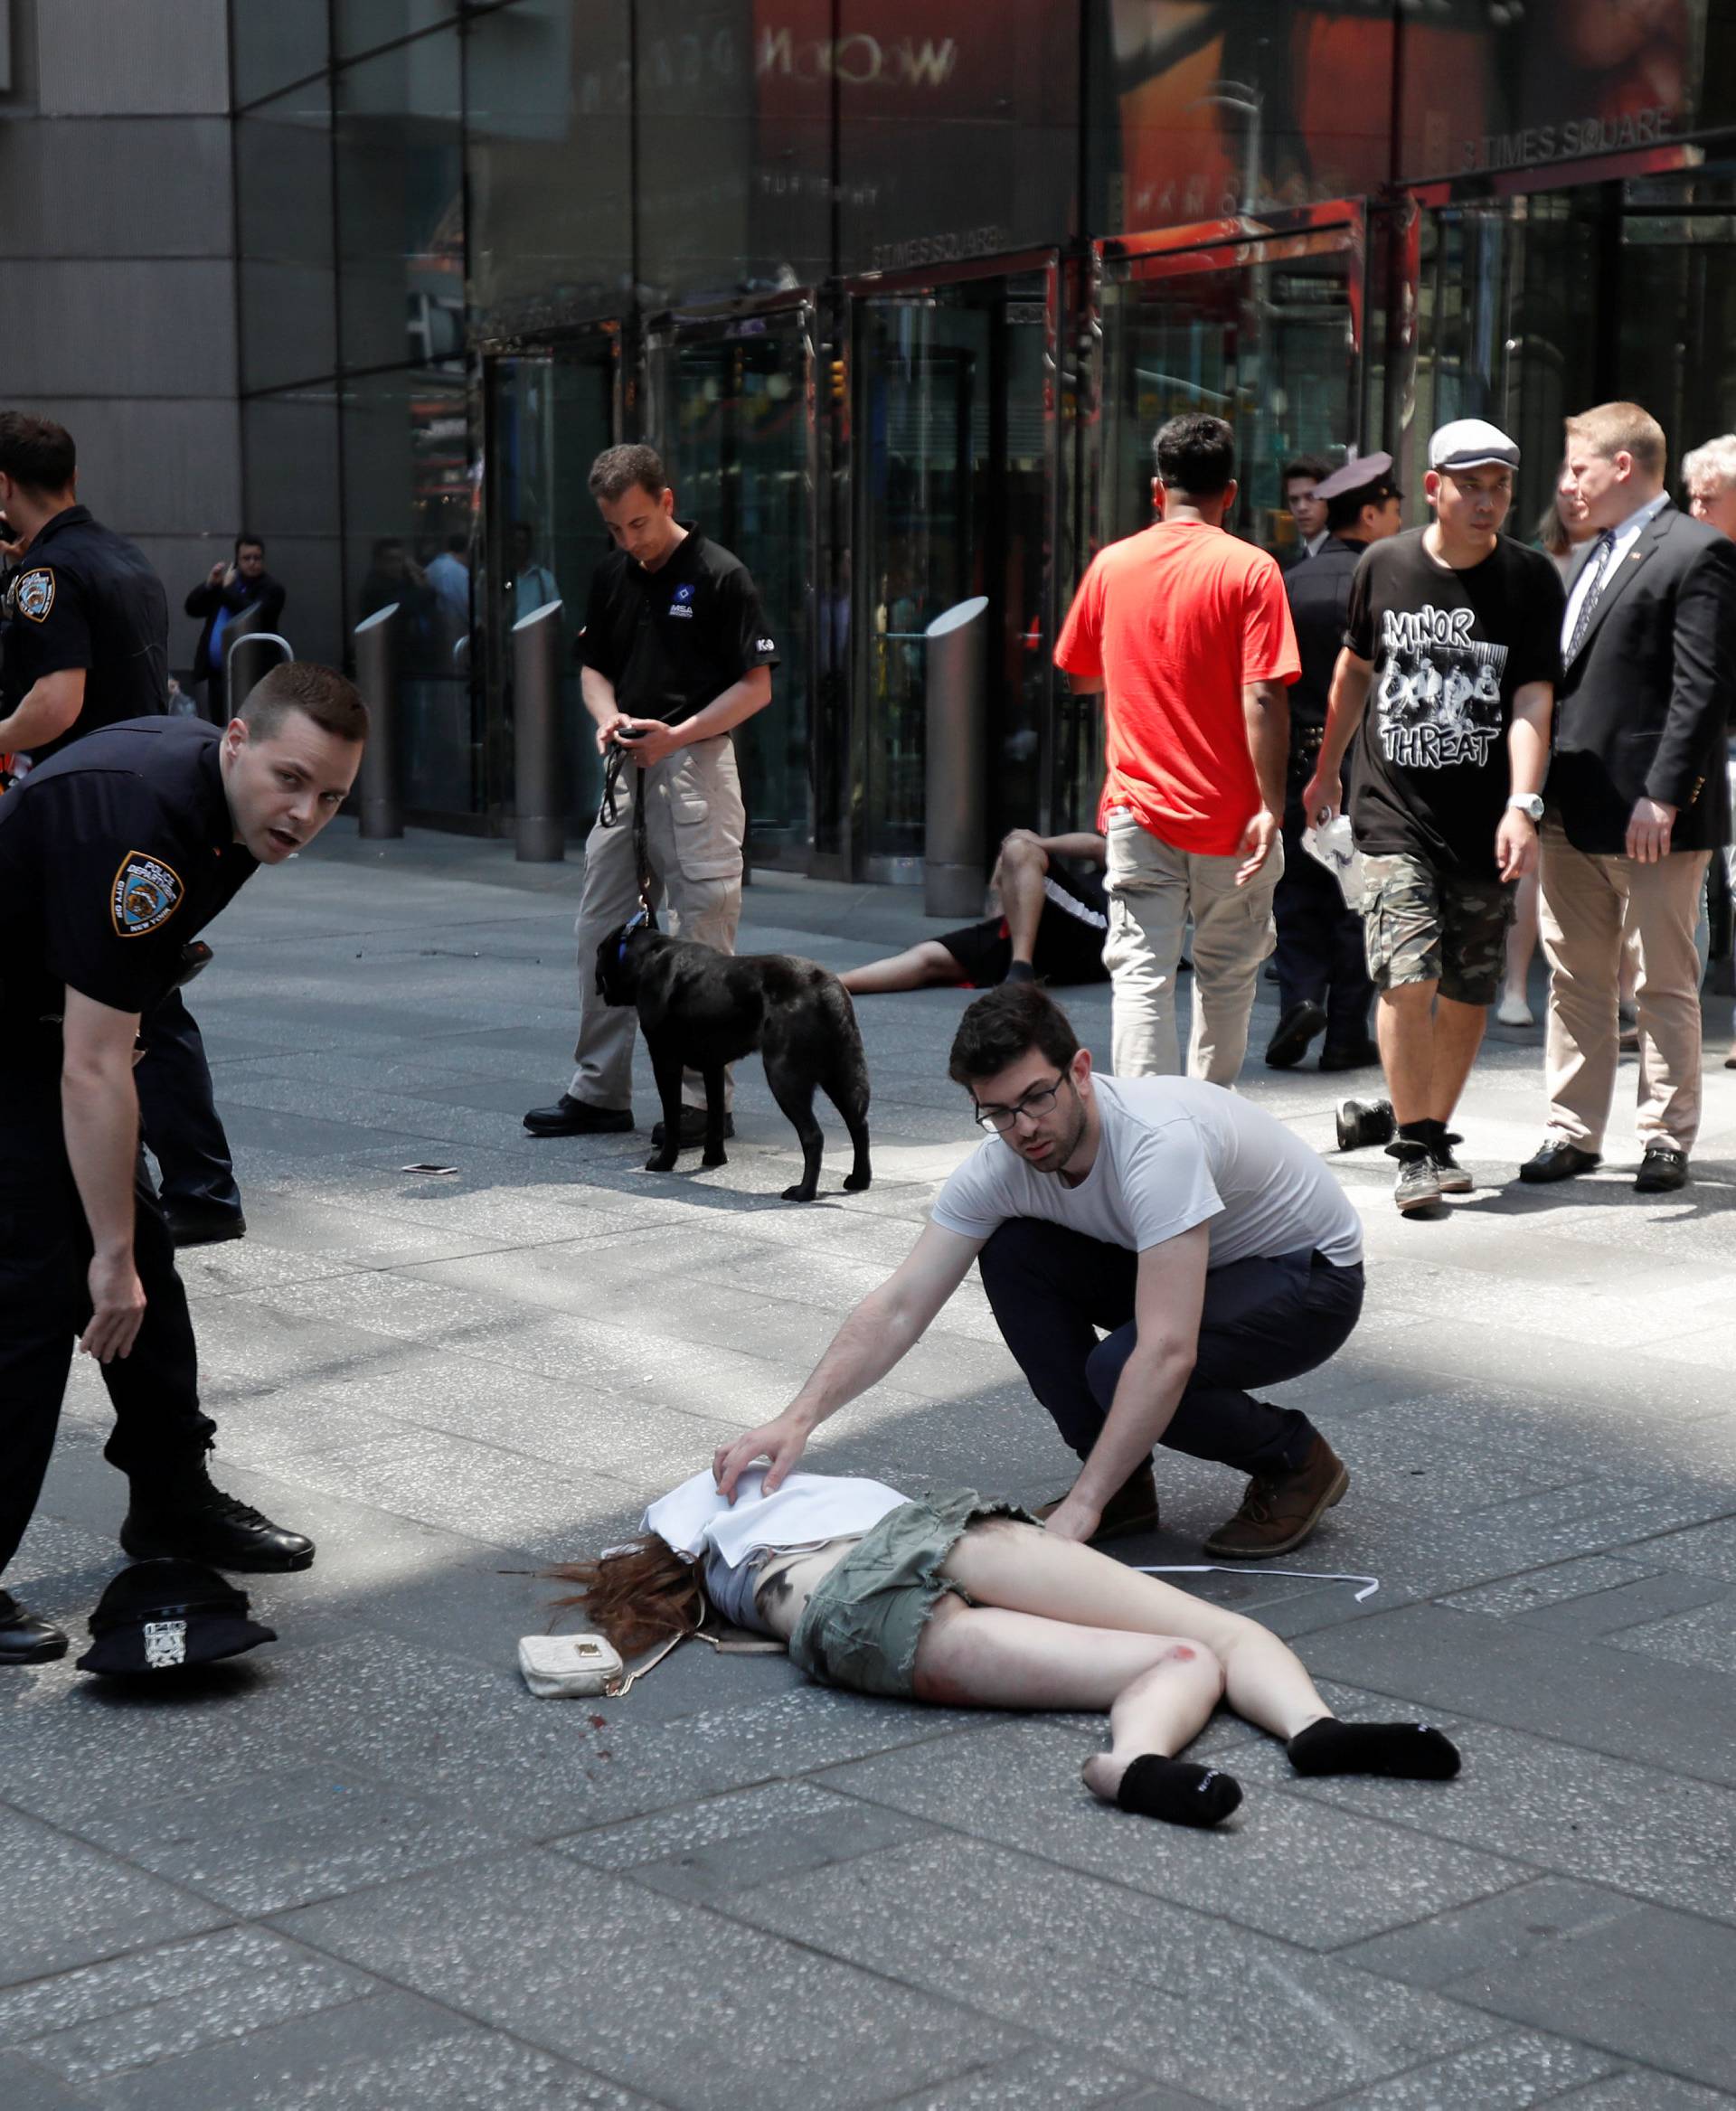 An injured woman is seen on the sidewalk in Times Square after a speeding vehicle struck pedestrians on the sidewalk inn New York City